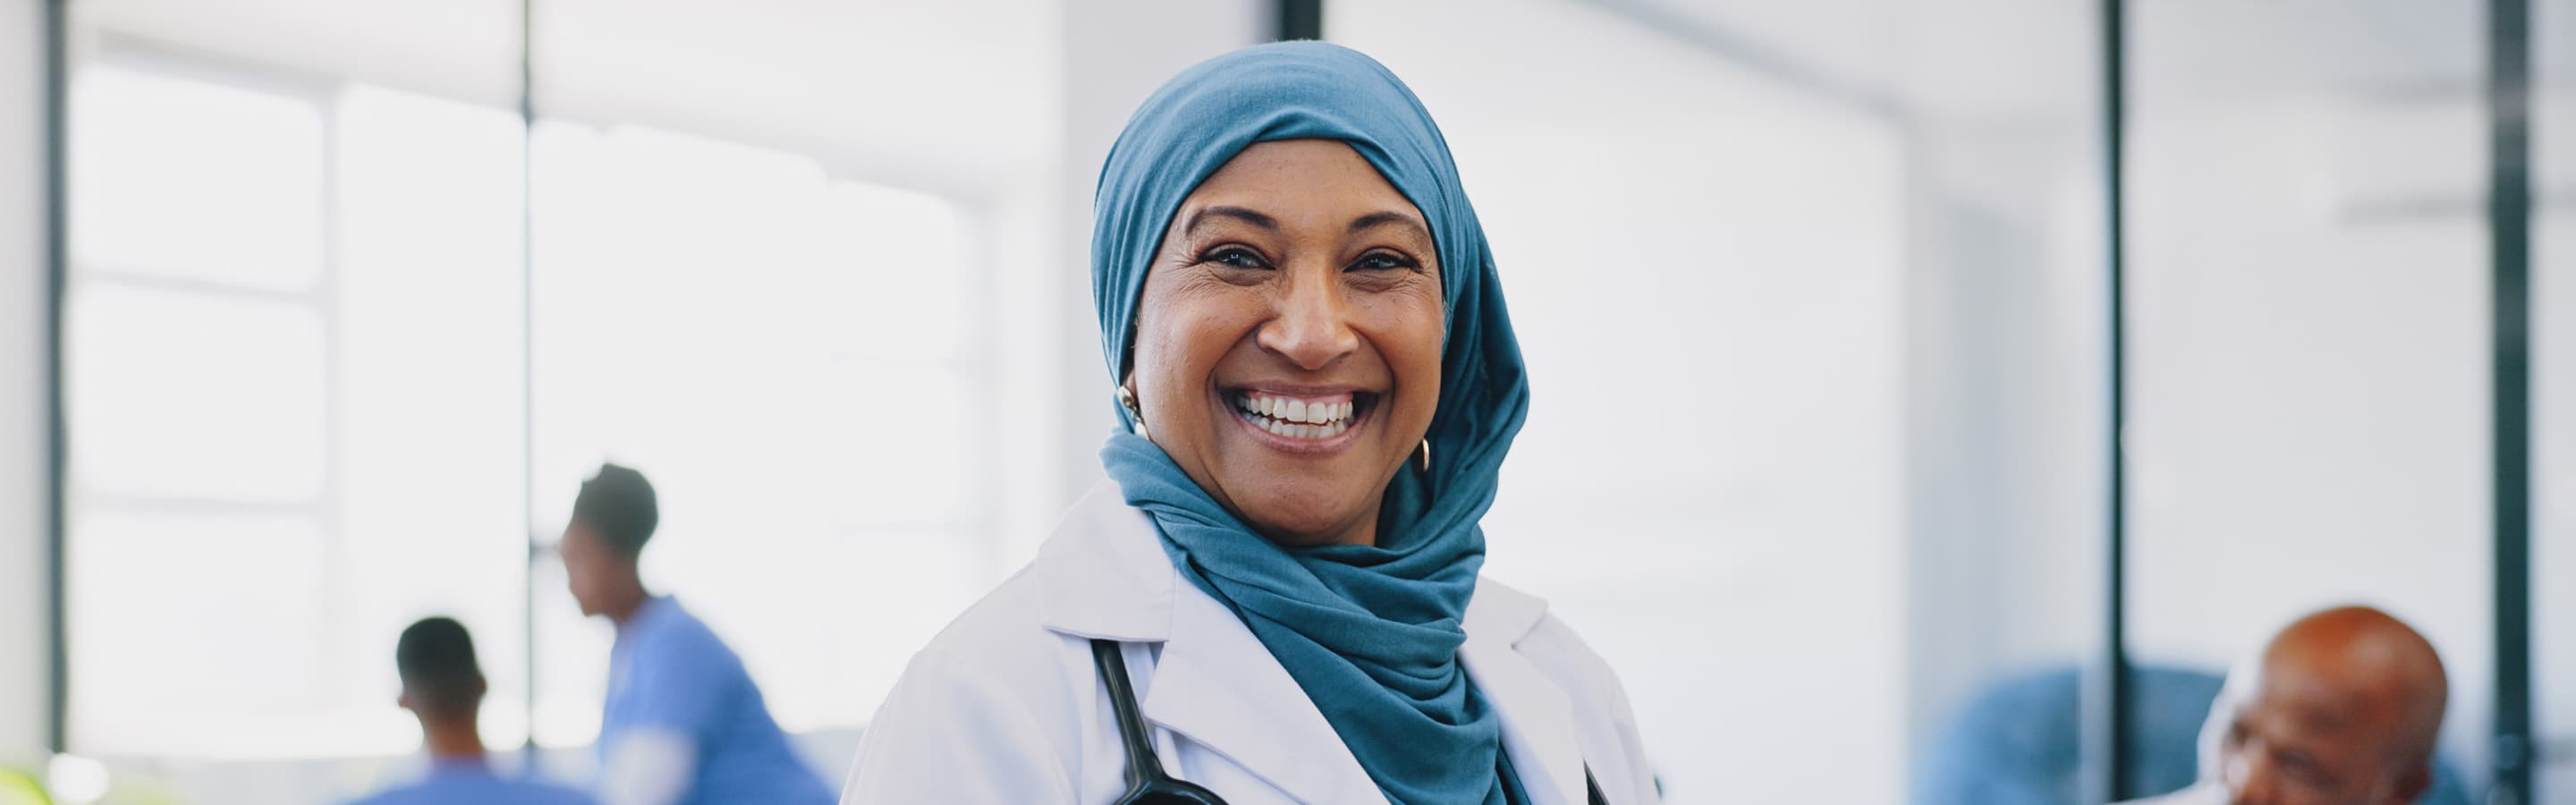 Female doctor wearing a hijab and smiling 